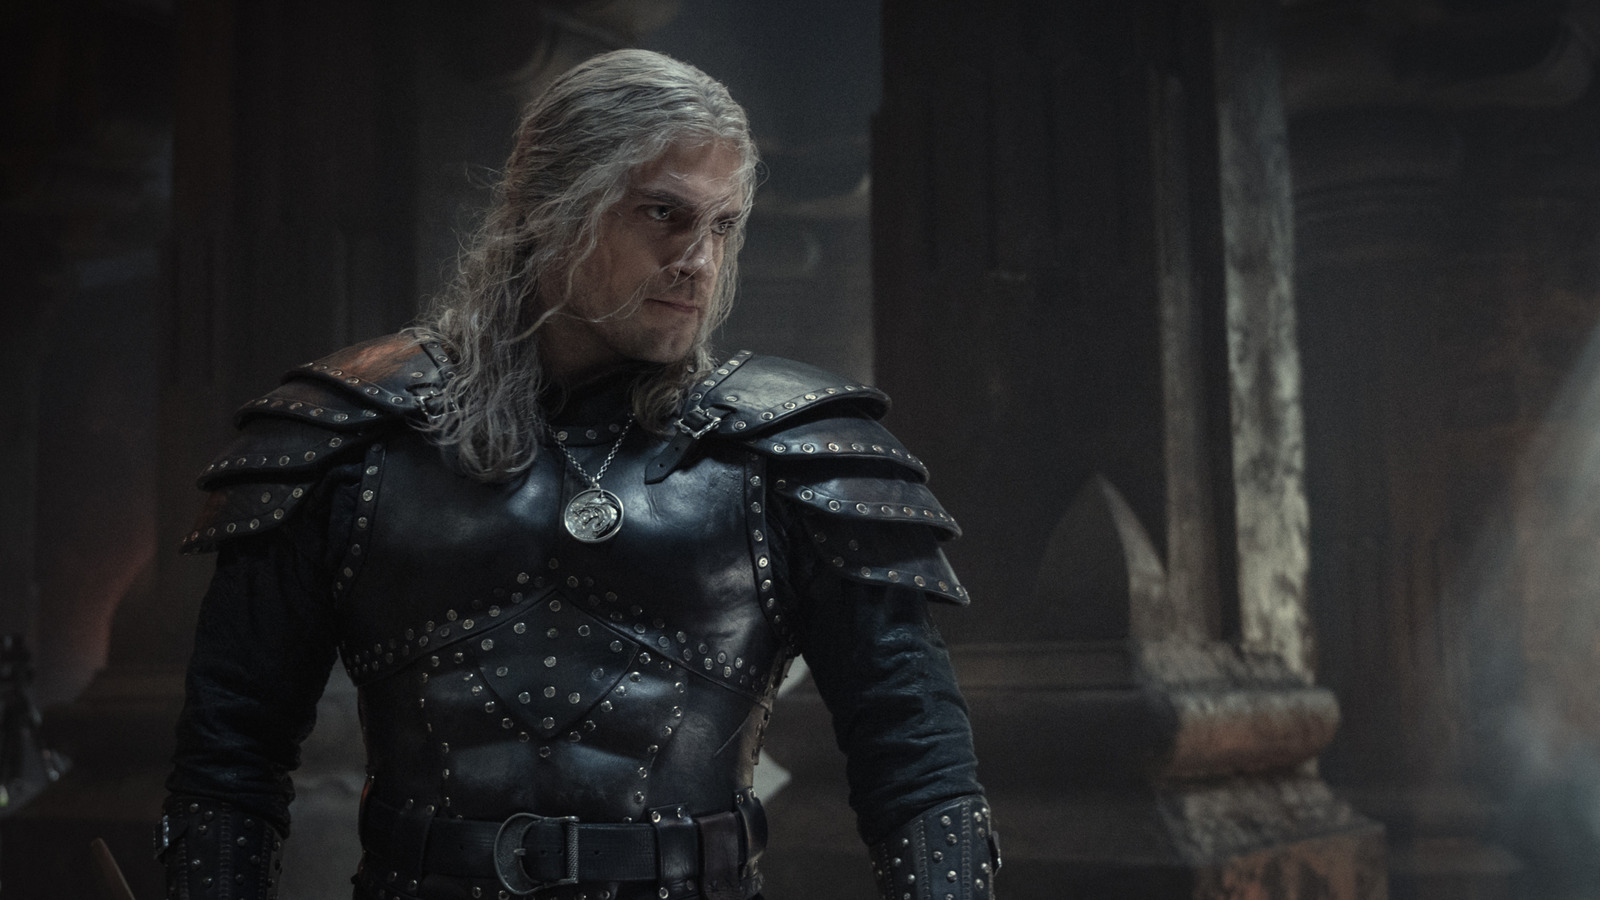 Why The Witcher Recast Henry Cavill’s Geralt Of Rivia Instead Of Ending The Series